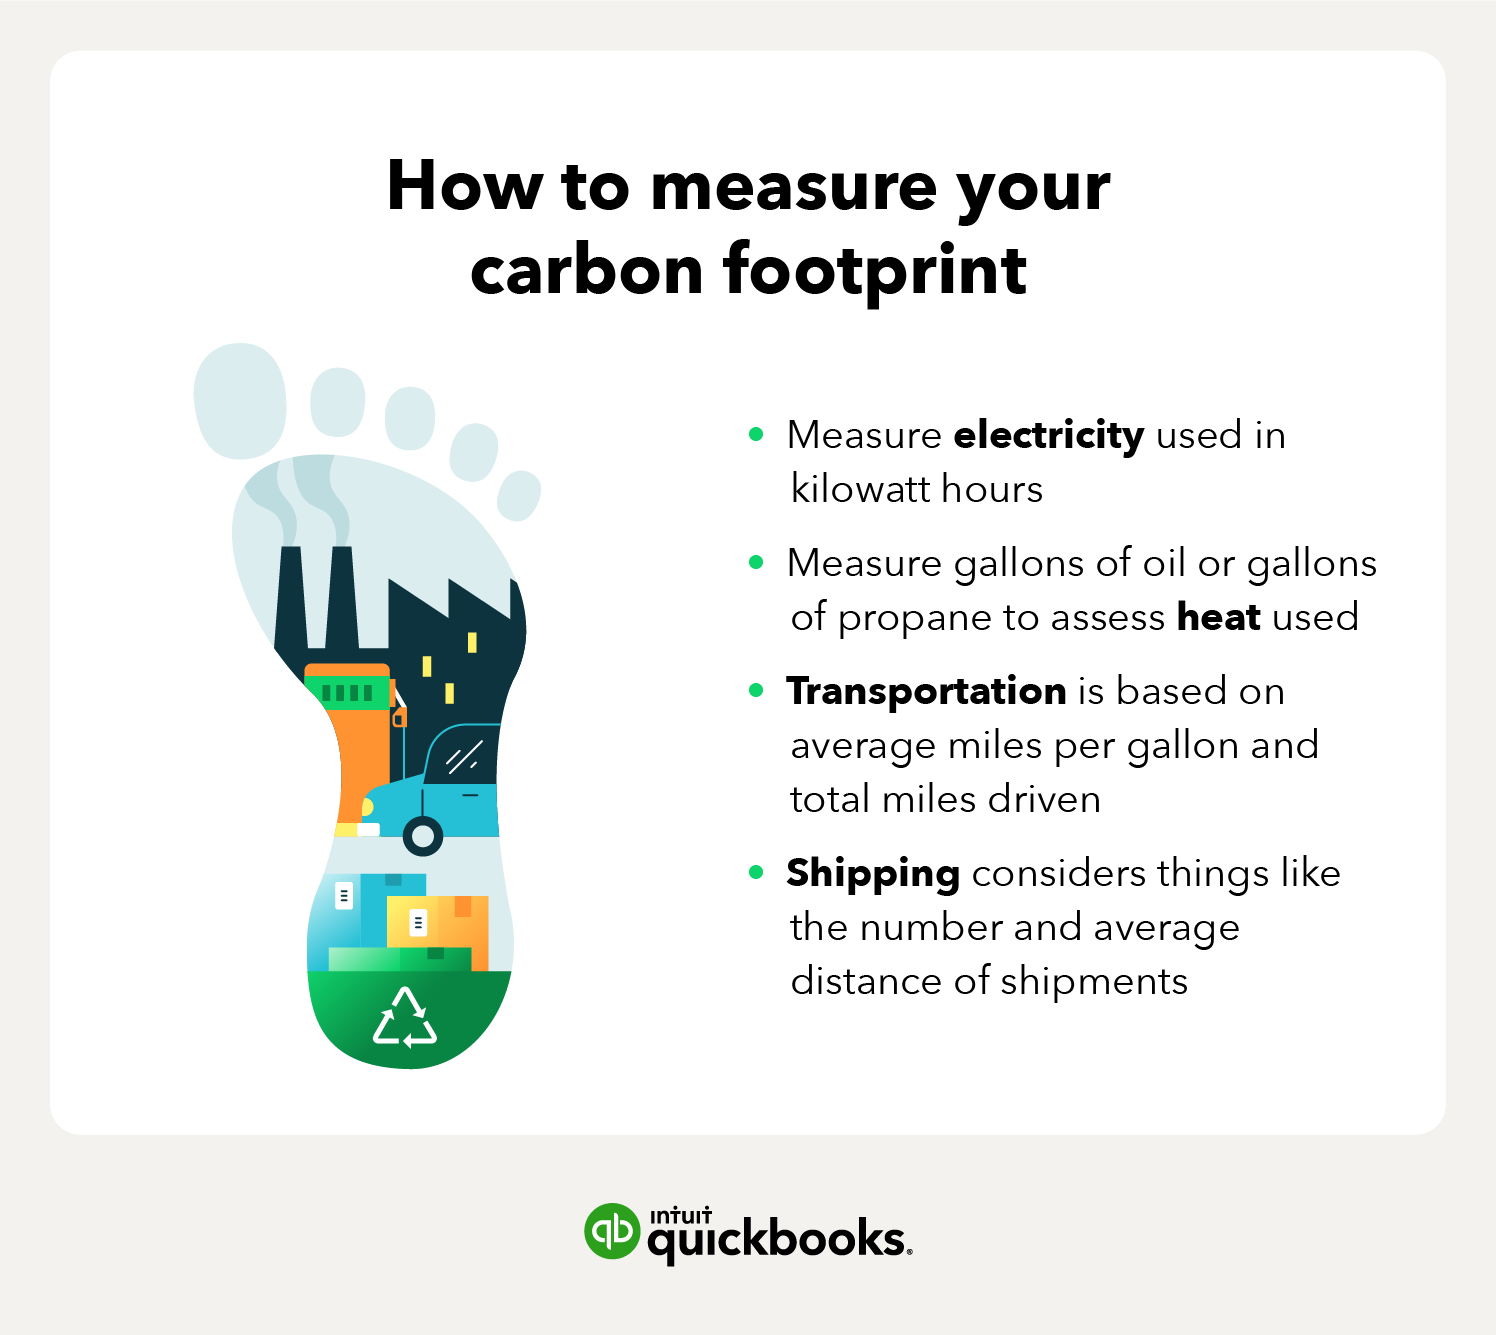 How to measure your carbon footprint